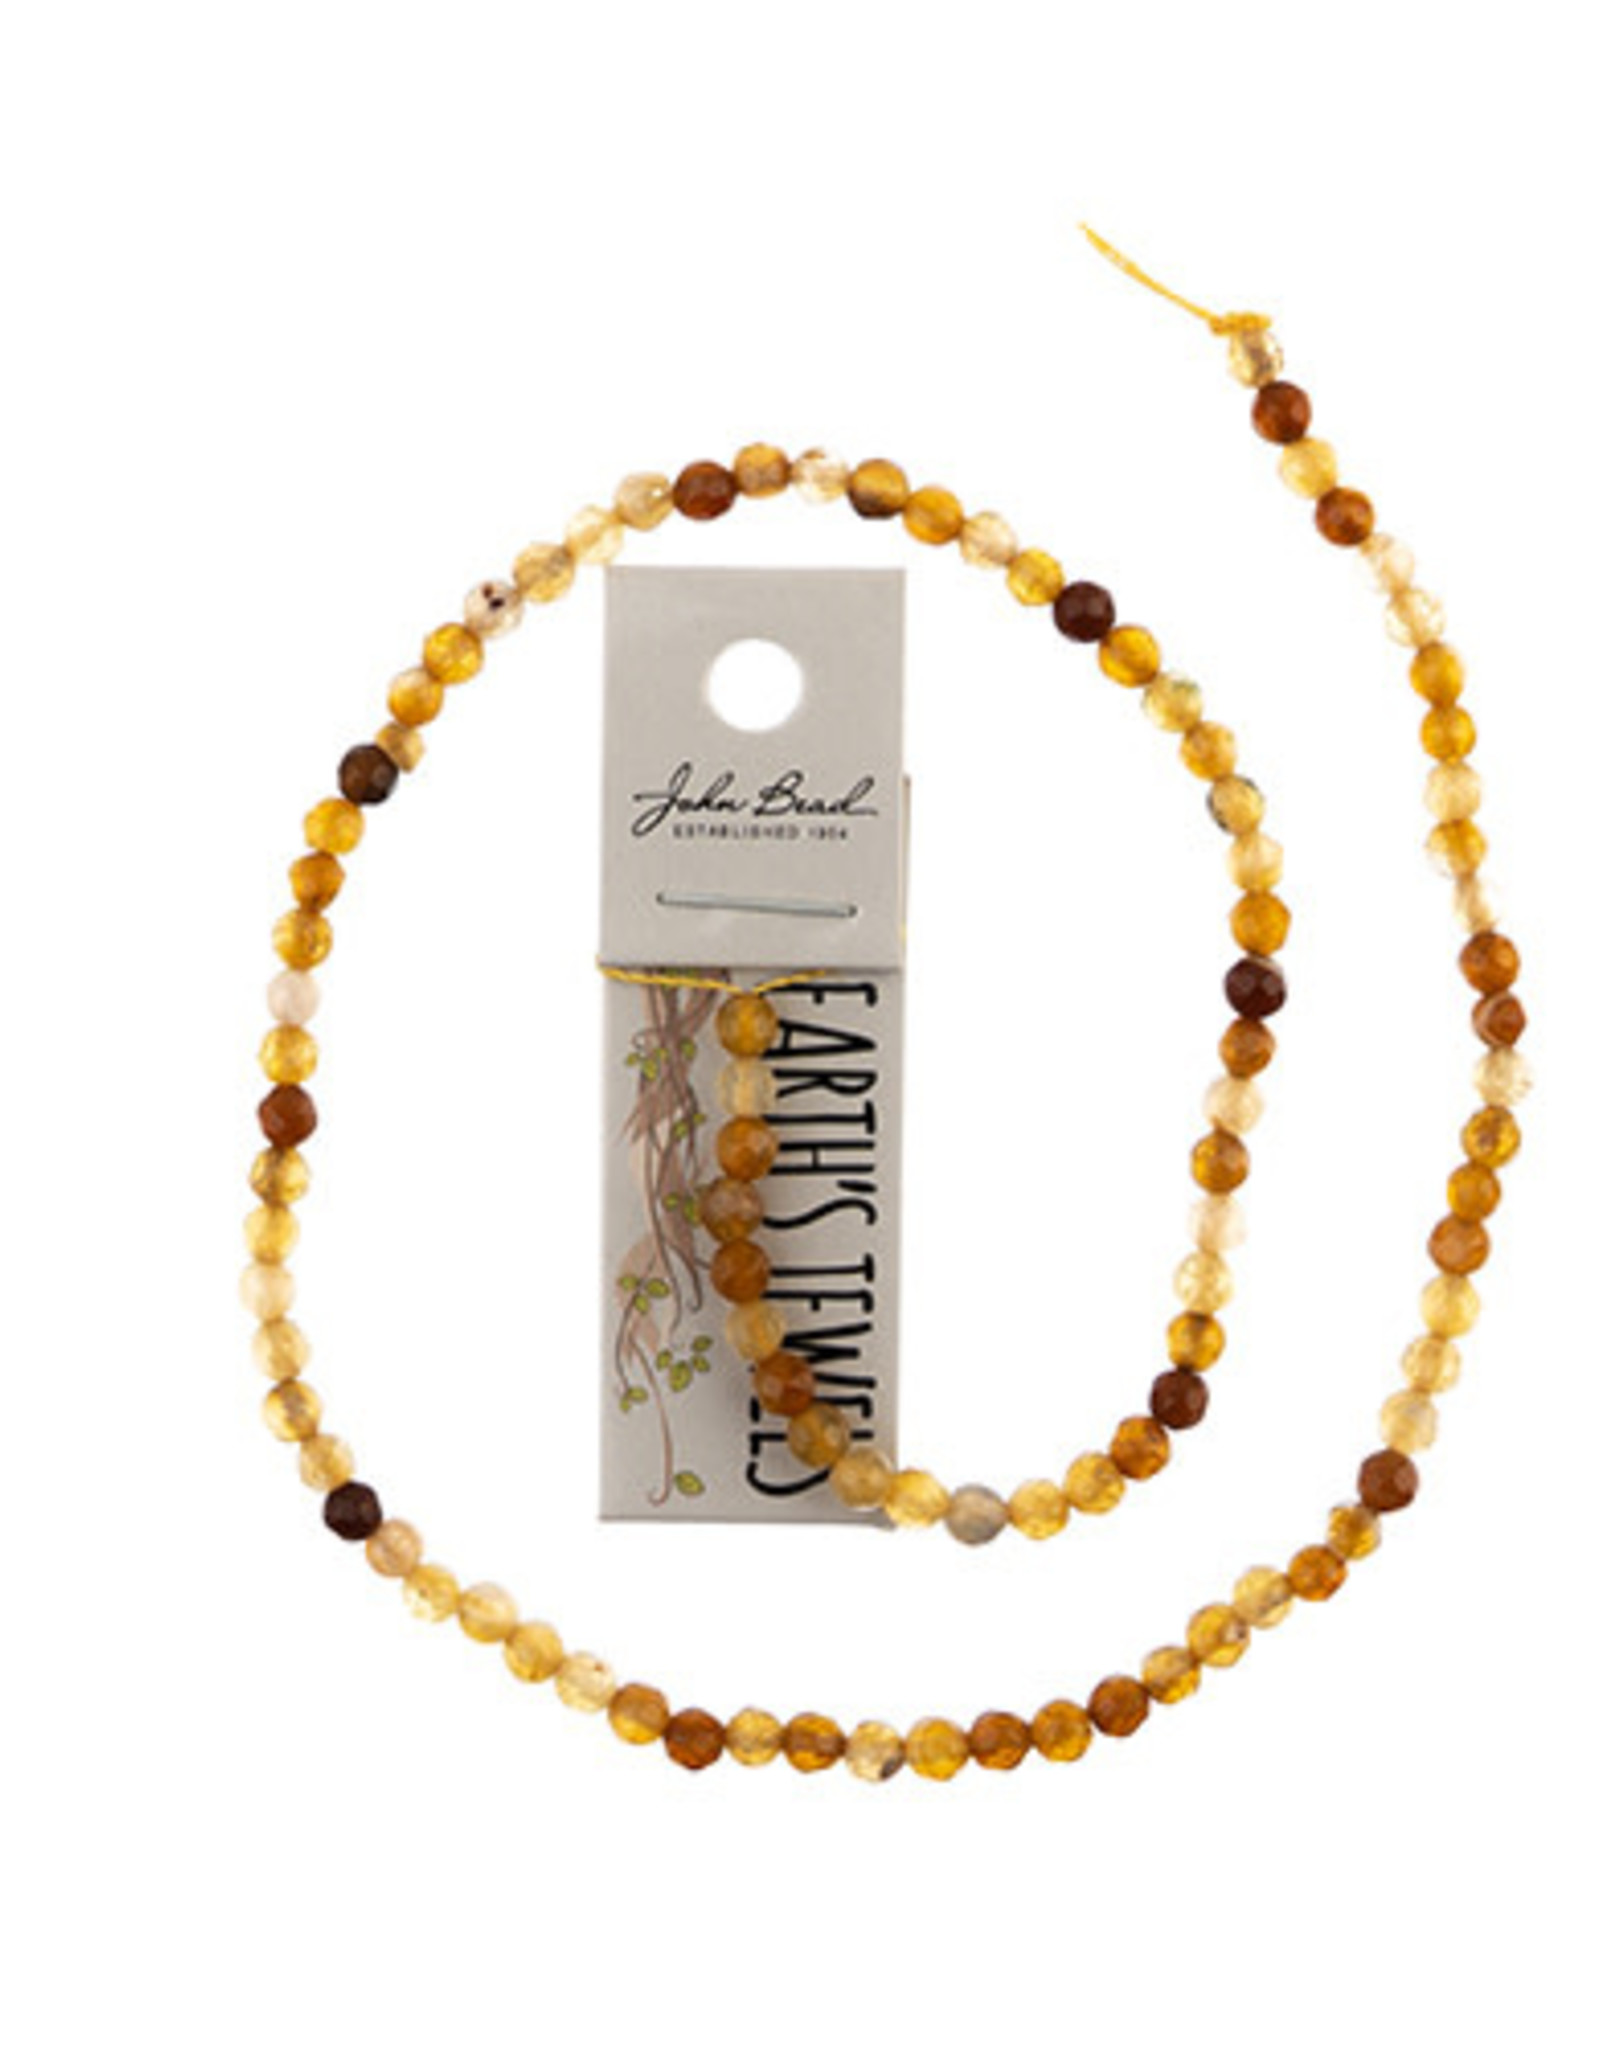 Earth Jewels Earth’s Jewels 16in Natural Agate Round Faceted 4mm Amber